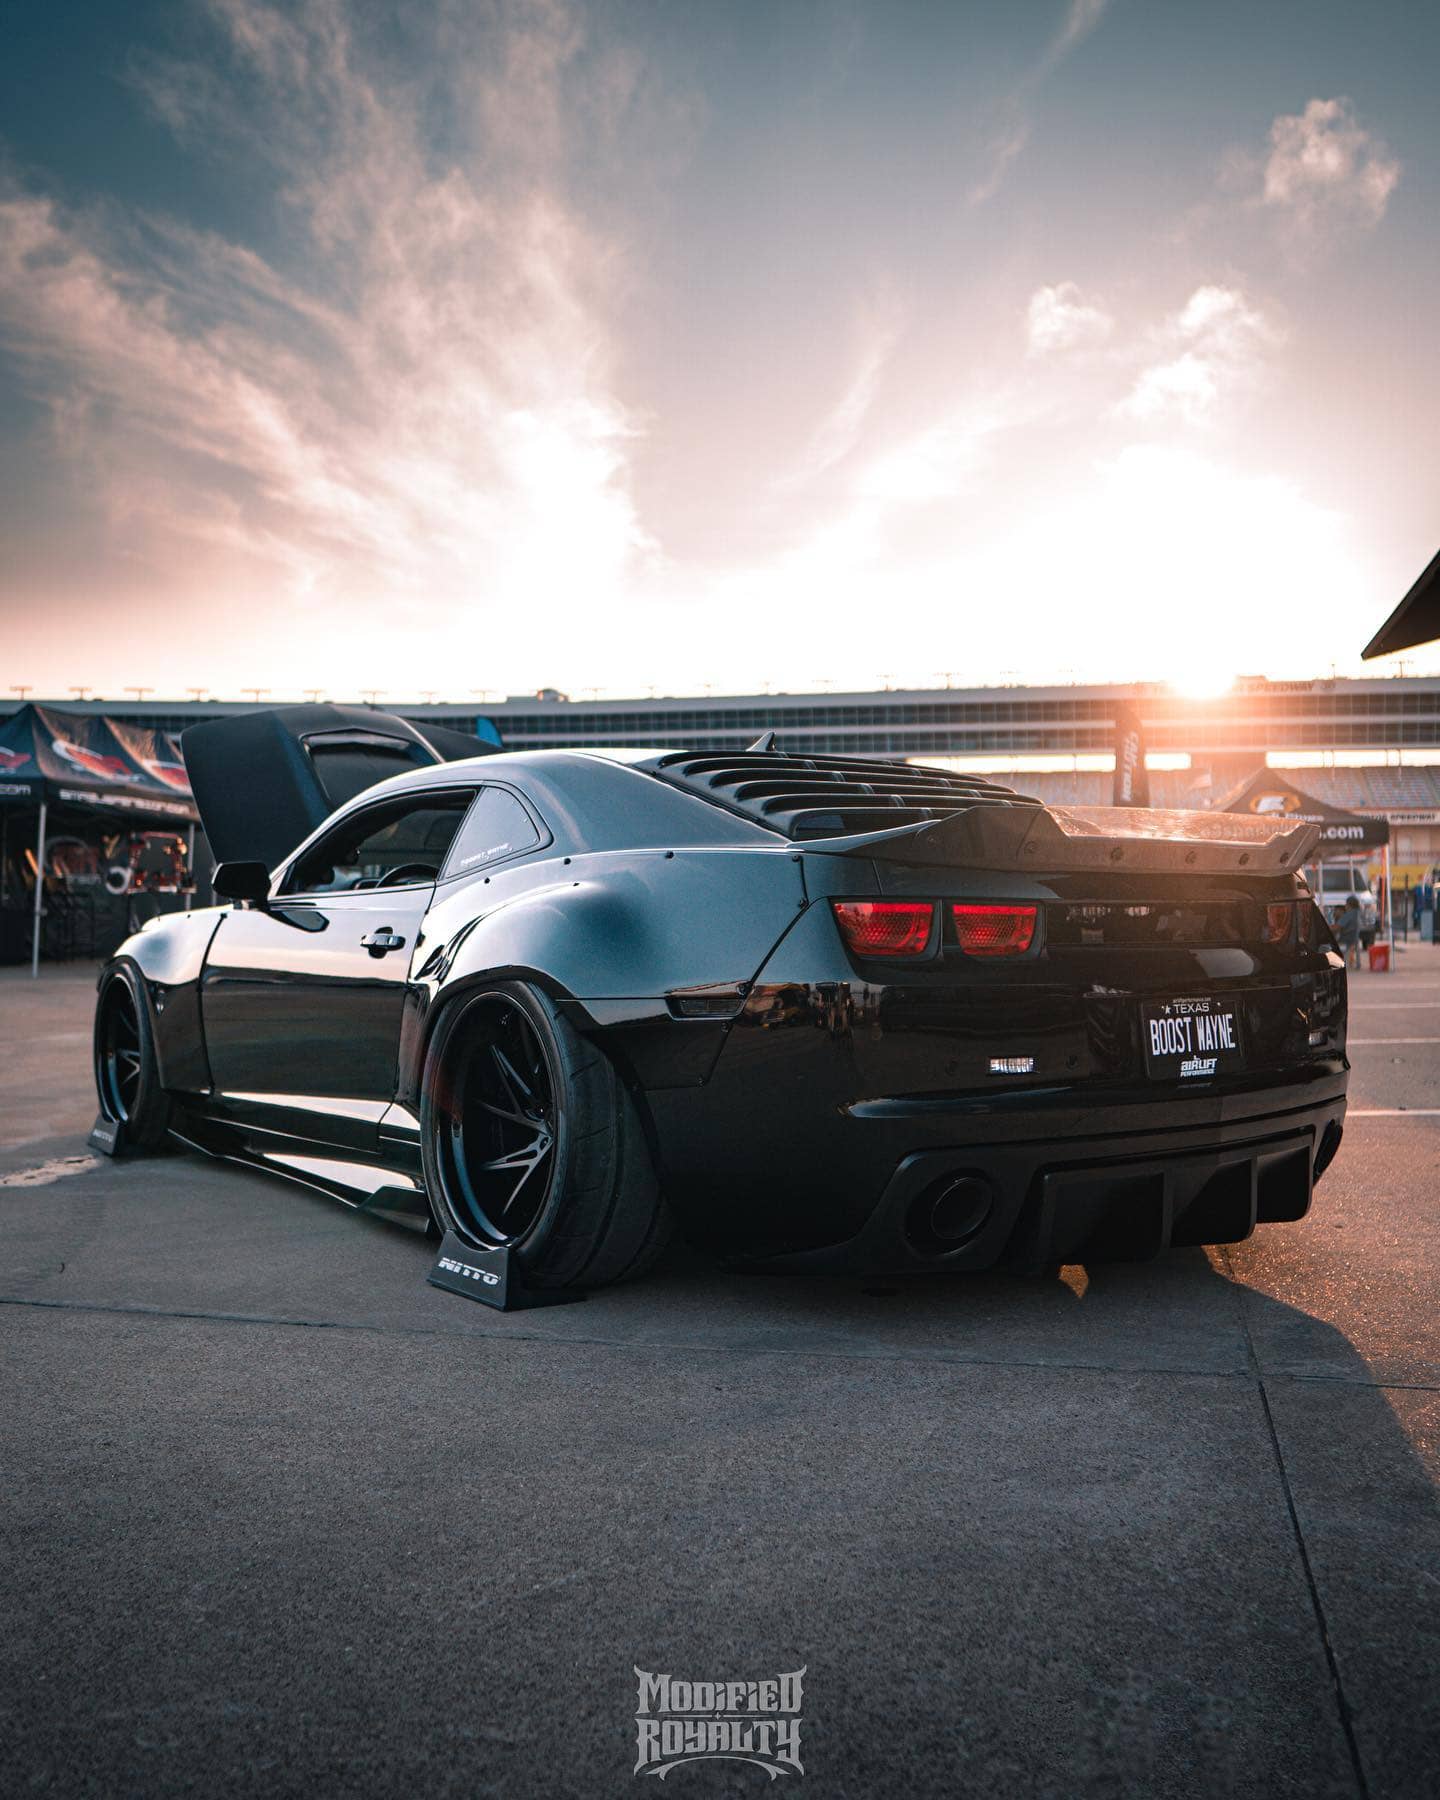 Modded Chevy Camaro SS 5th gen with wide body kit and air suspension